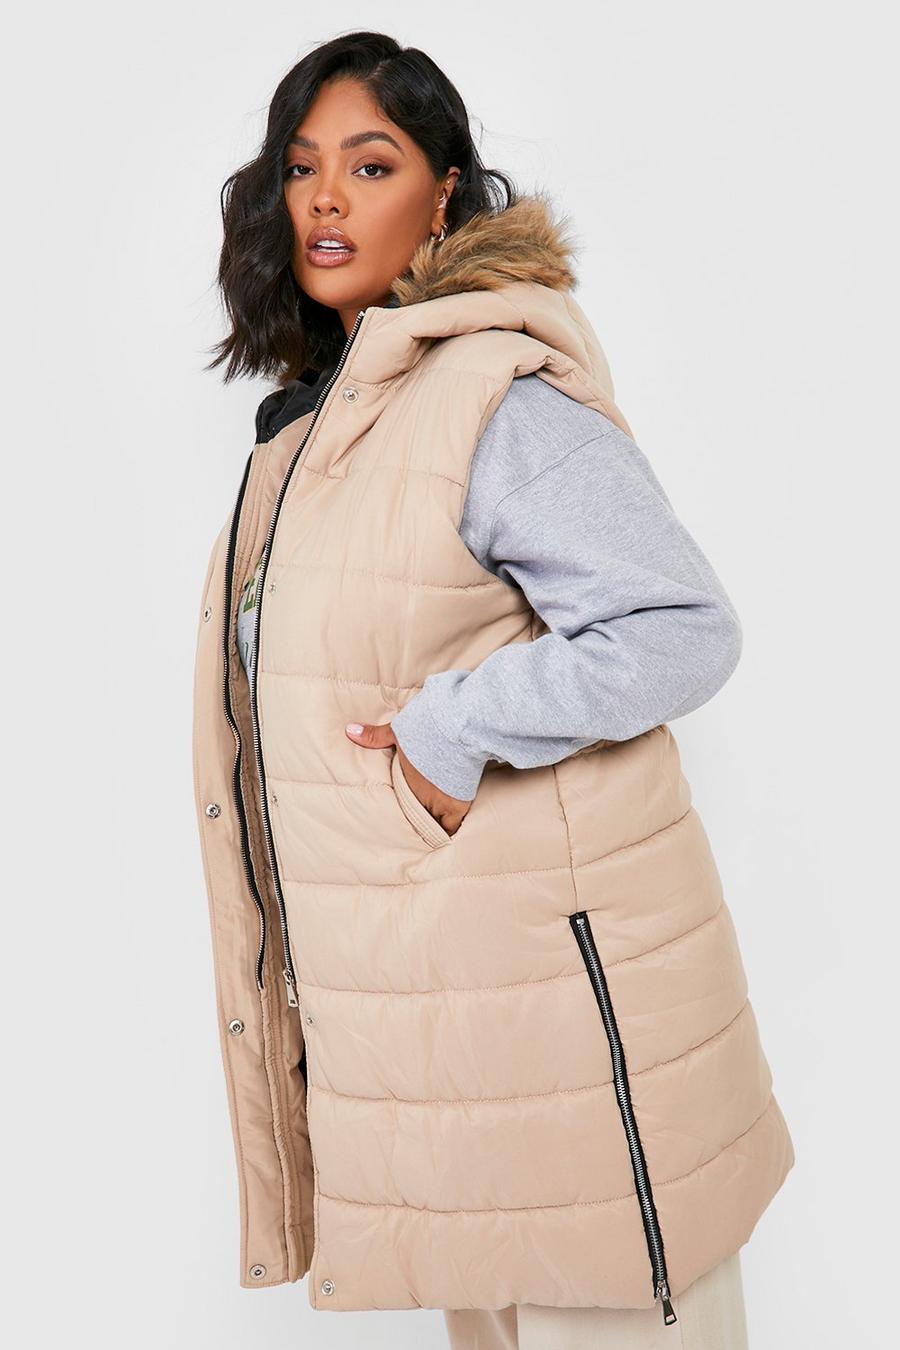 YOURS Curve Plus Size Black Puffer Jacket